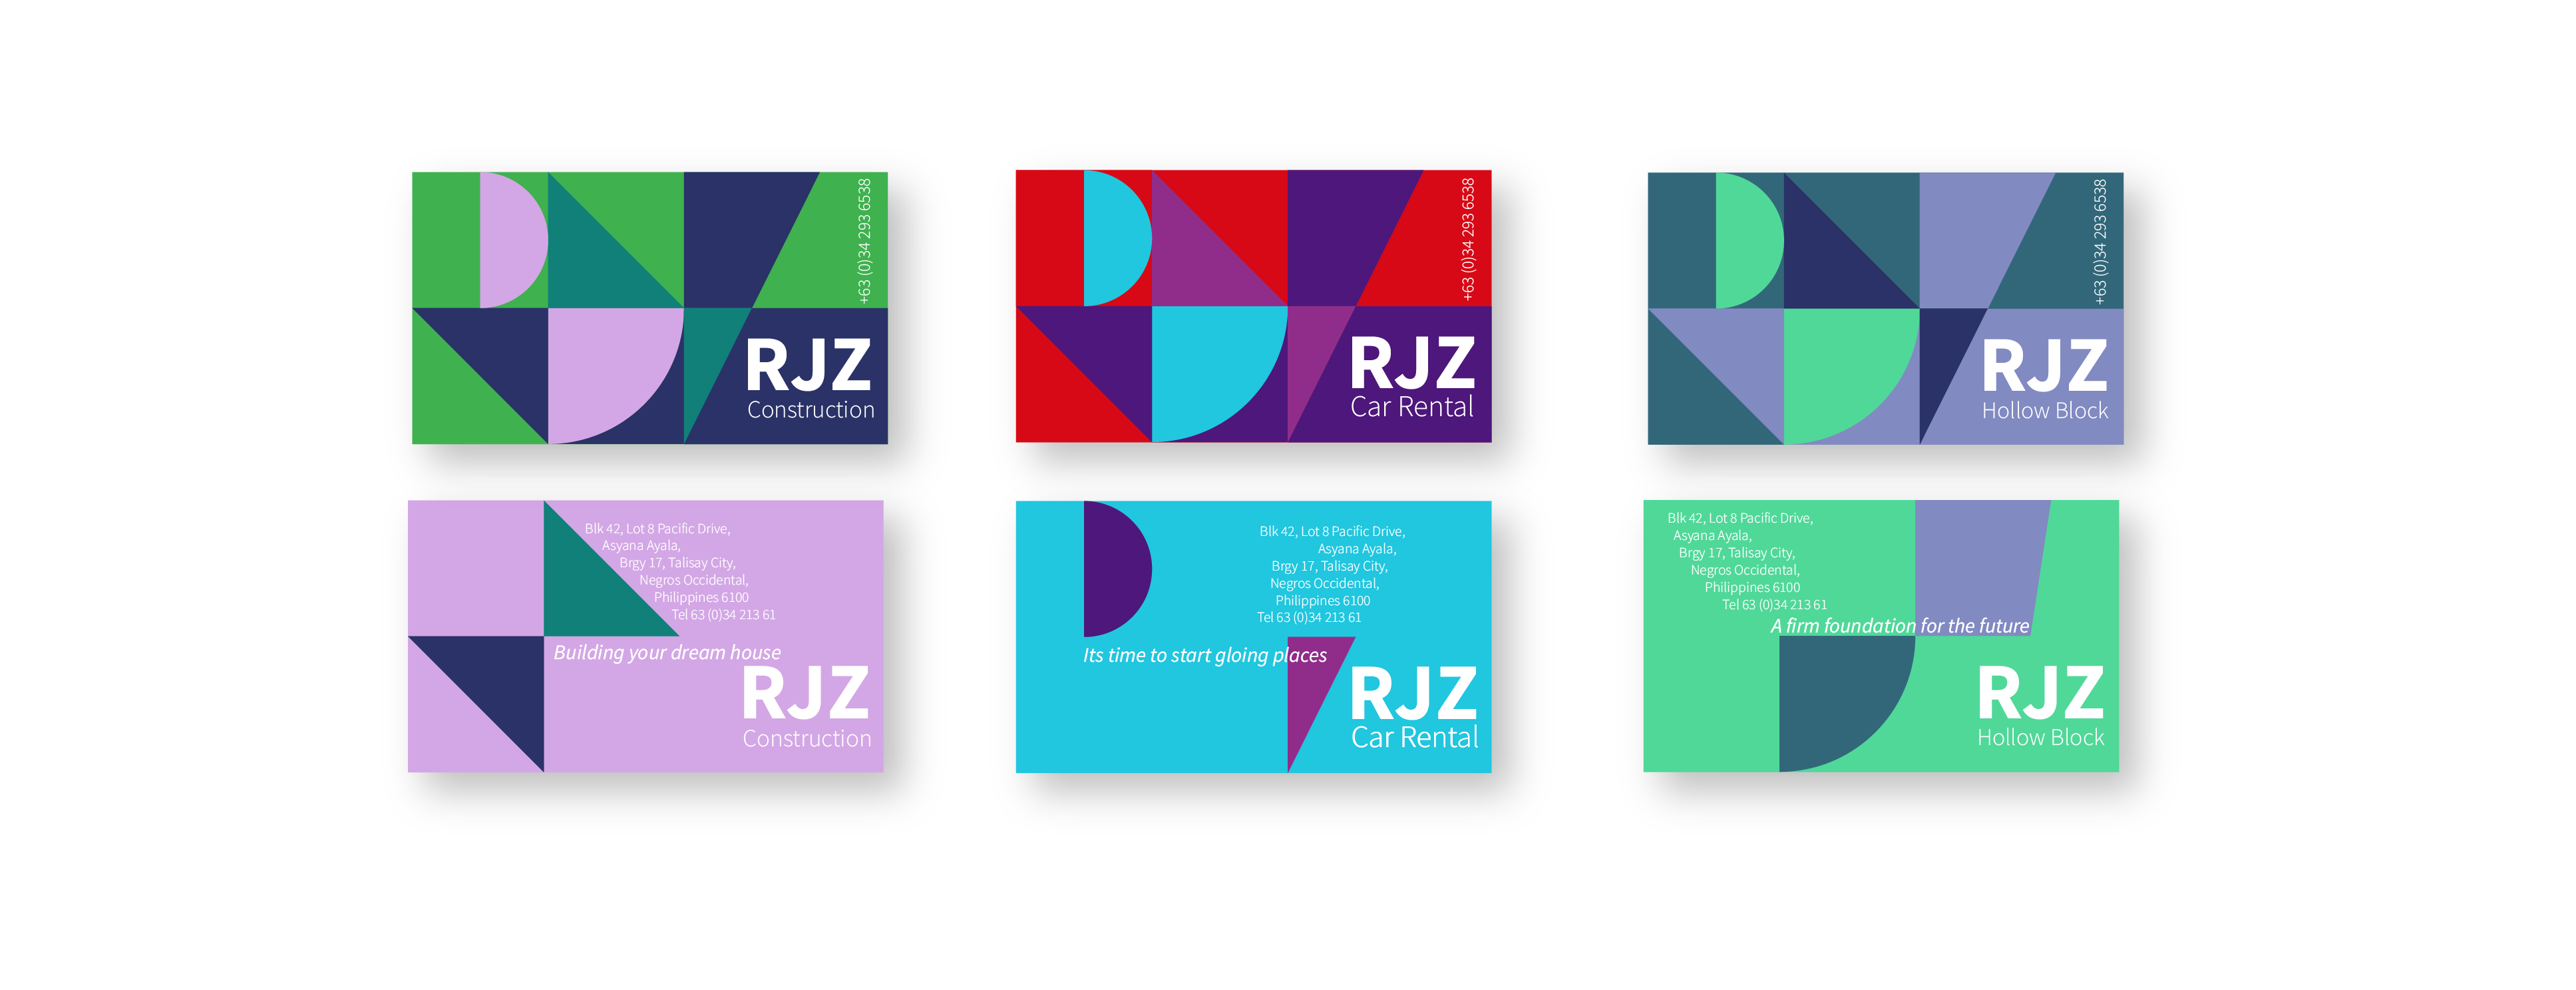 RJZ - composite of all three business cards for construction, hollow block, and car rental, front and reverse.